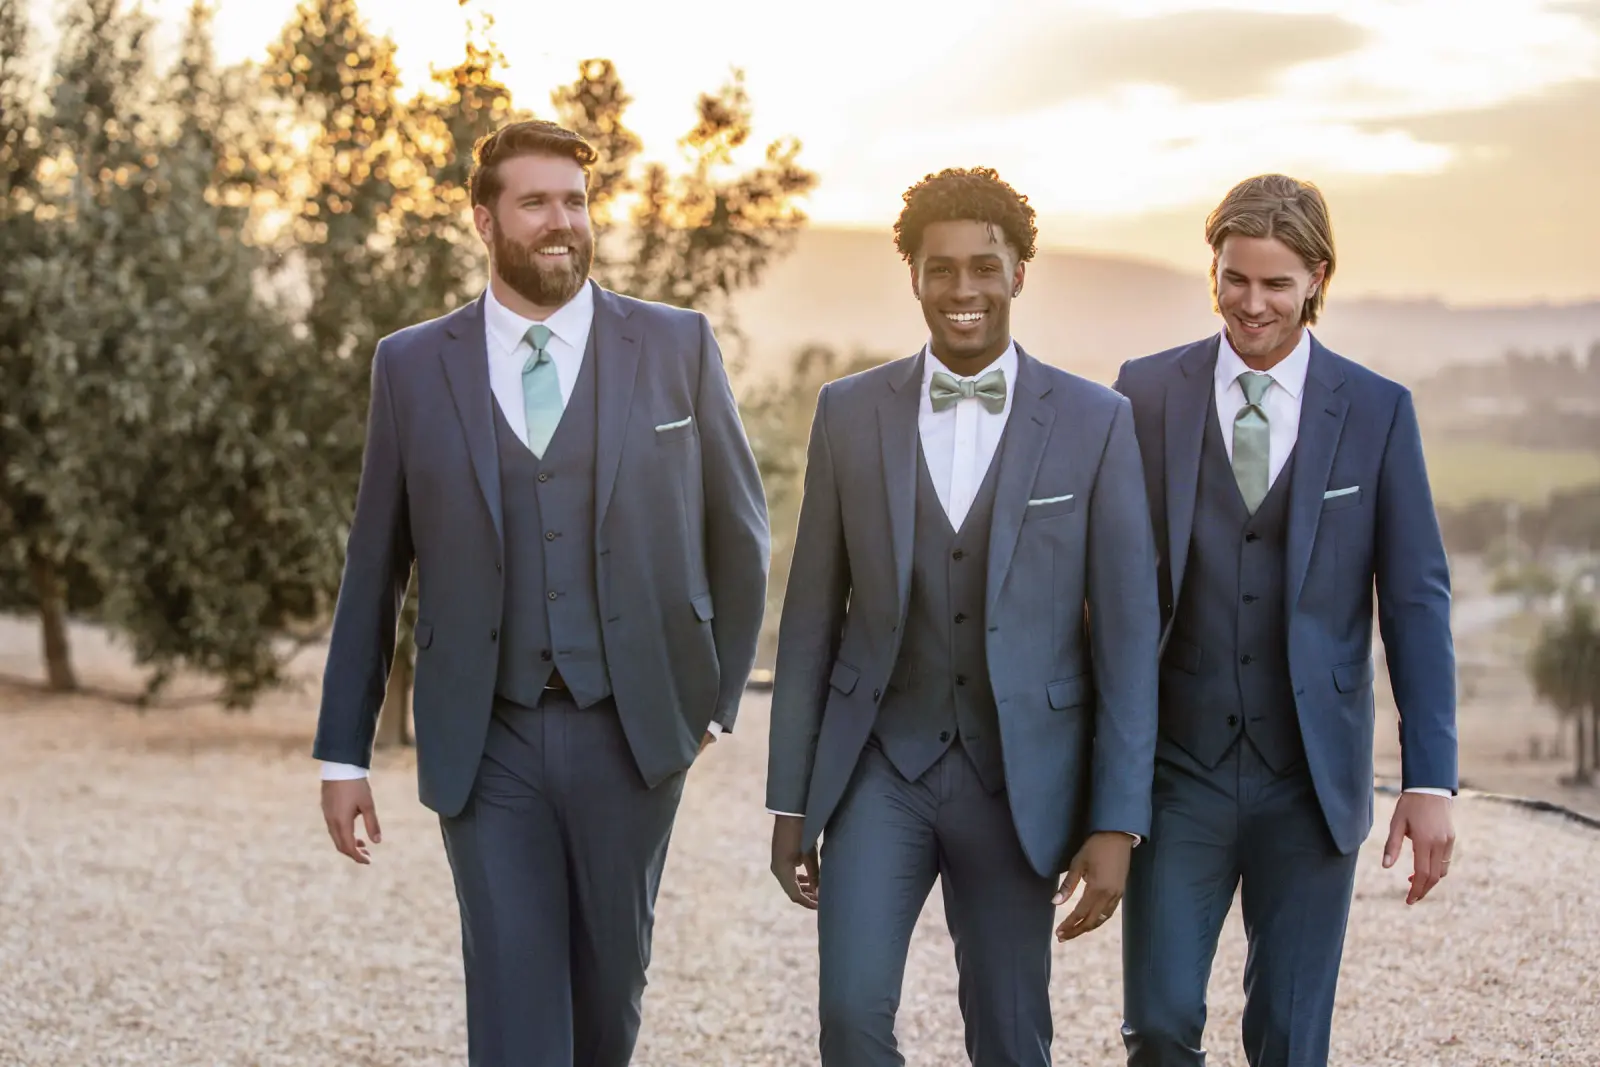 Navy Blue Suit for Men  Suits for Weddings & Events